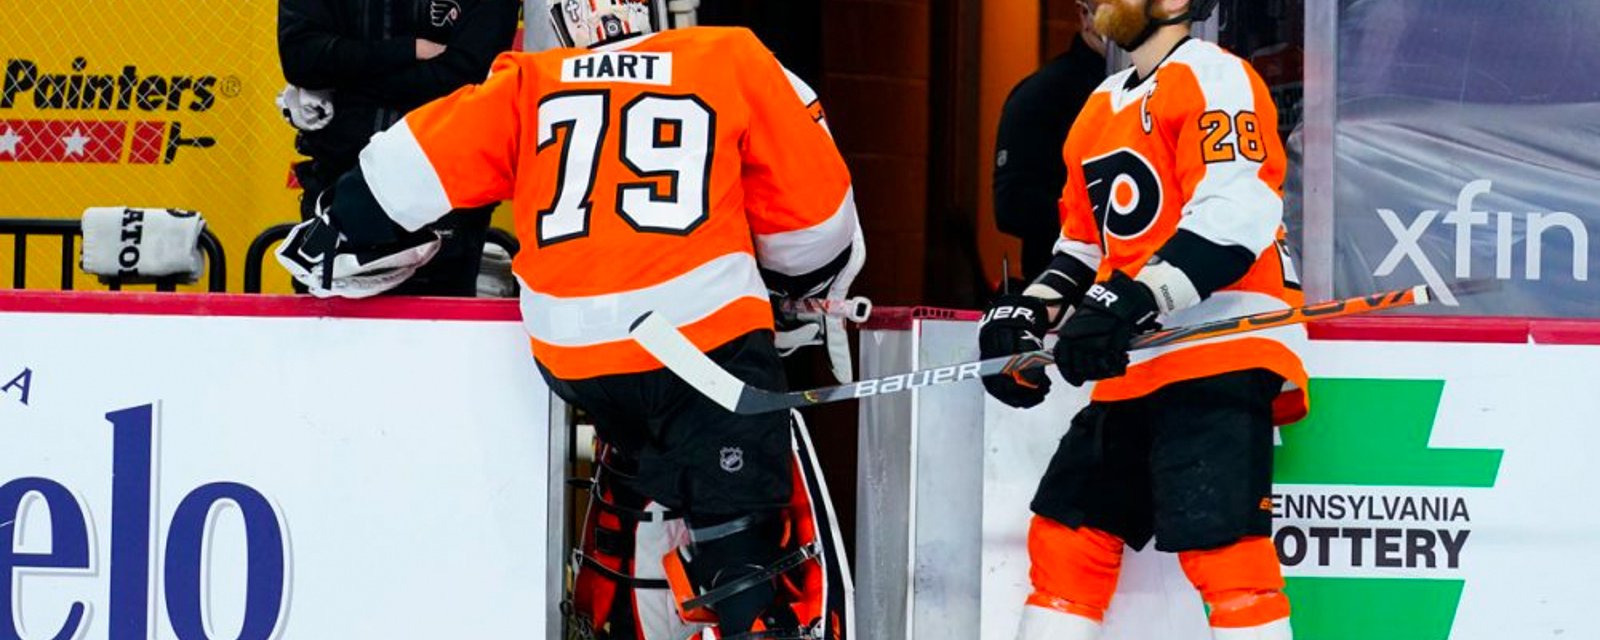 Coach Vigneault calls out Carter Hart for not working hard enough